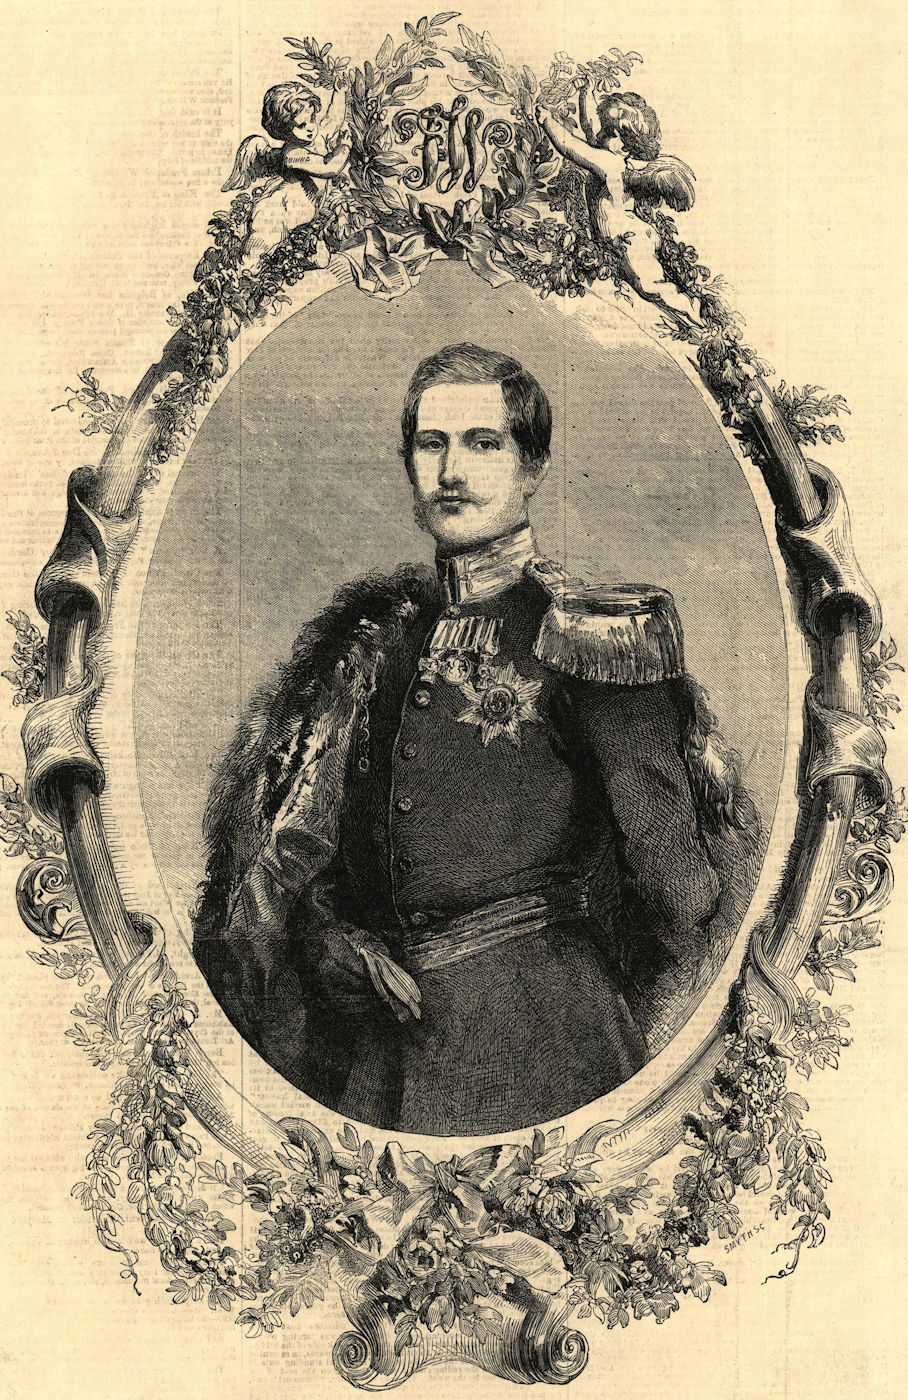 His Royal Highness Frederic William, Prince of Prussia. Royalty 1856 ILN print